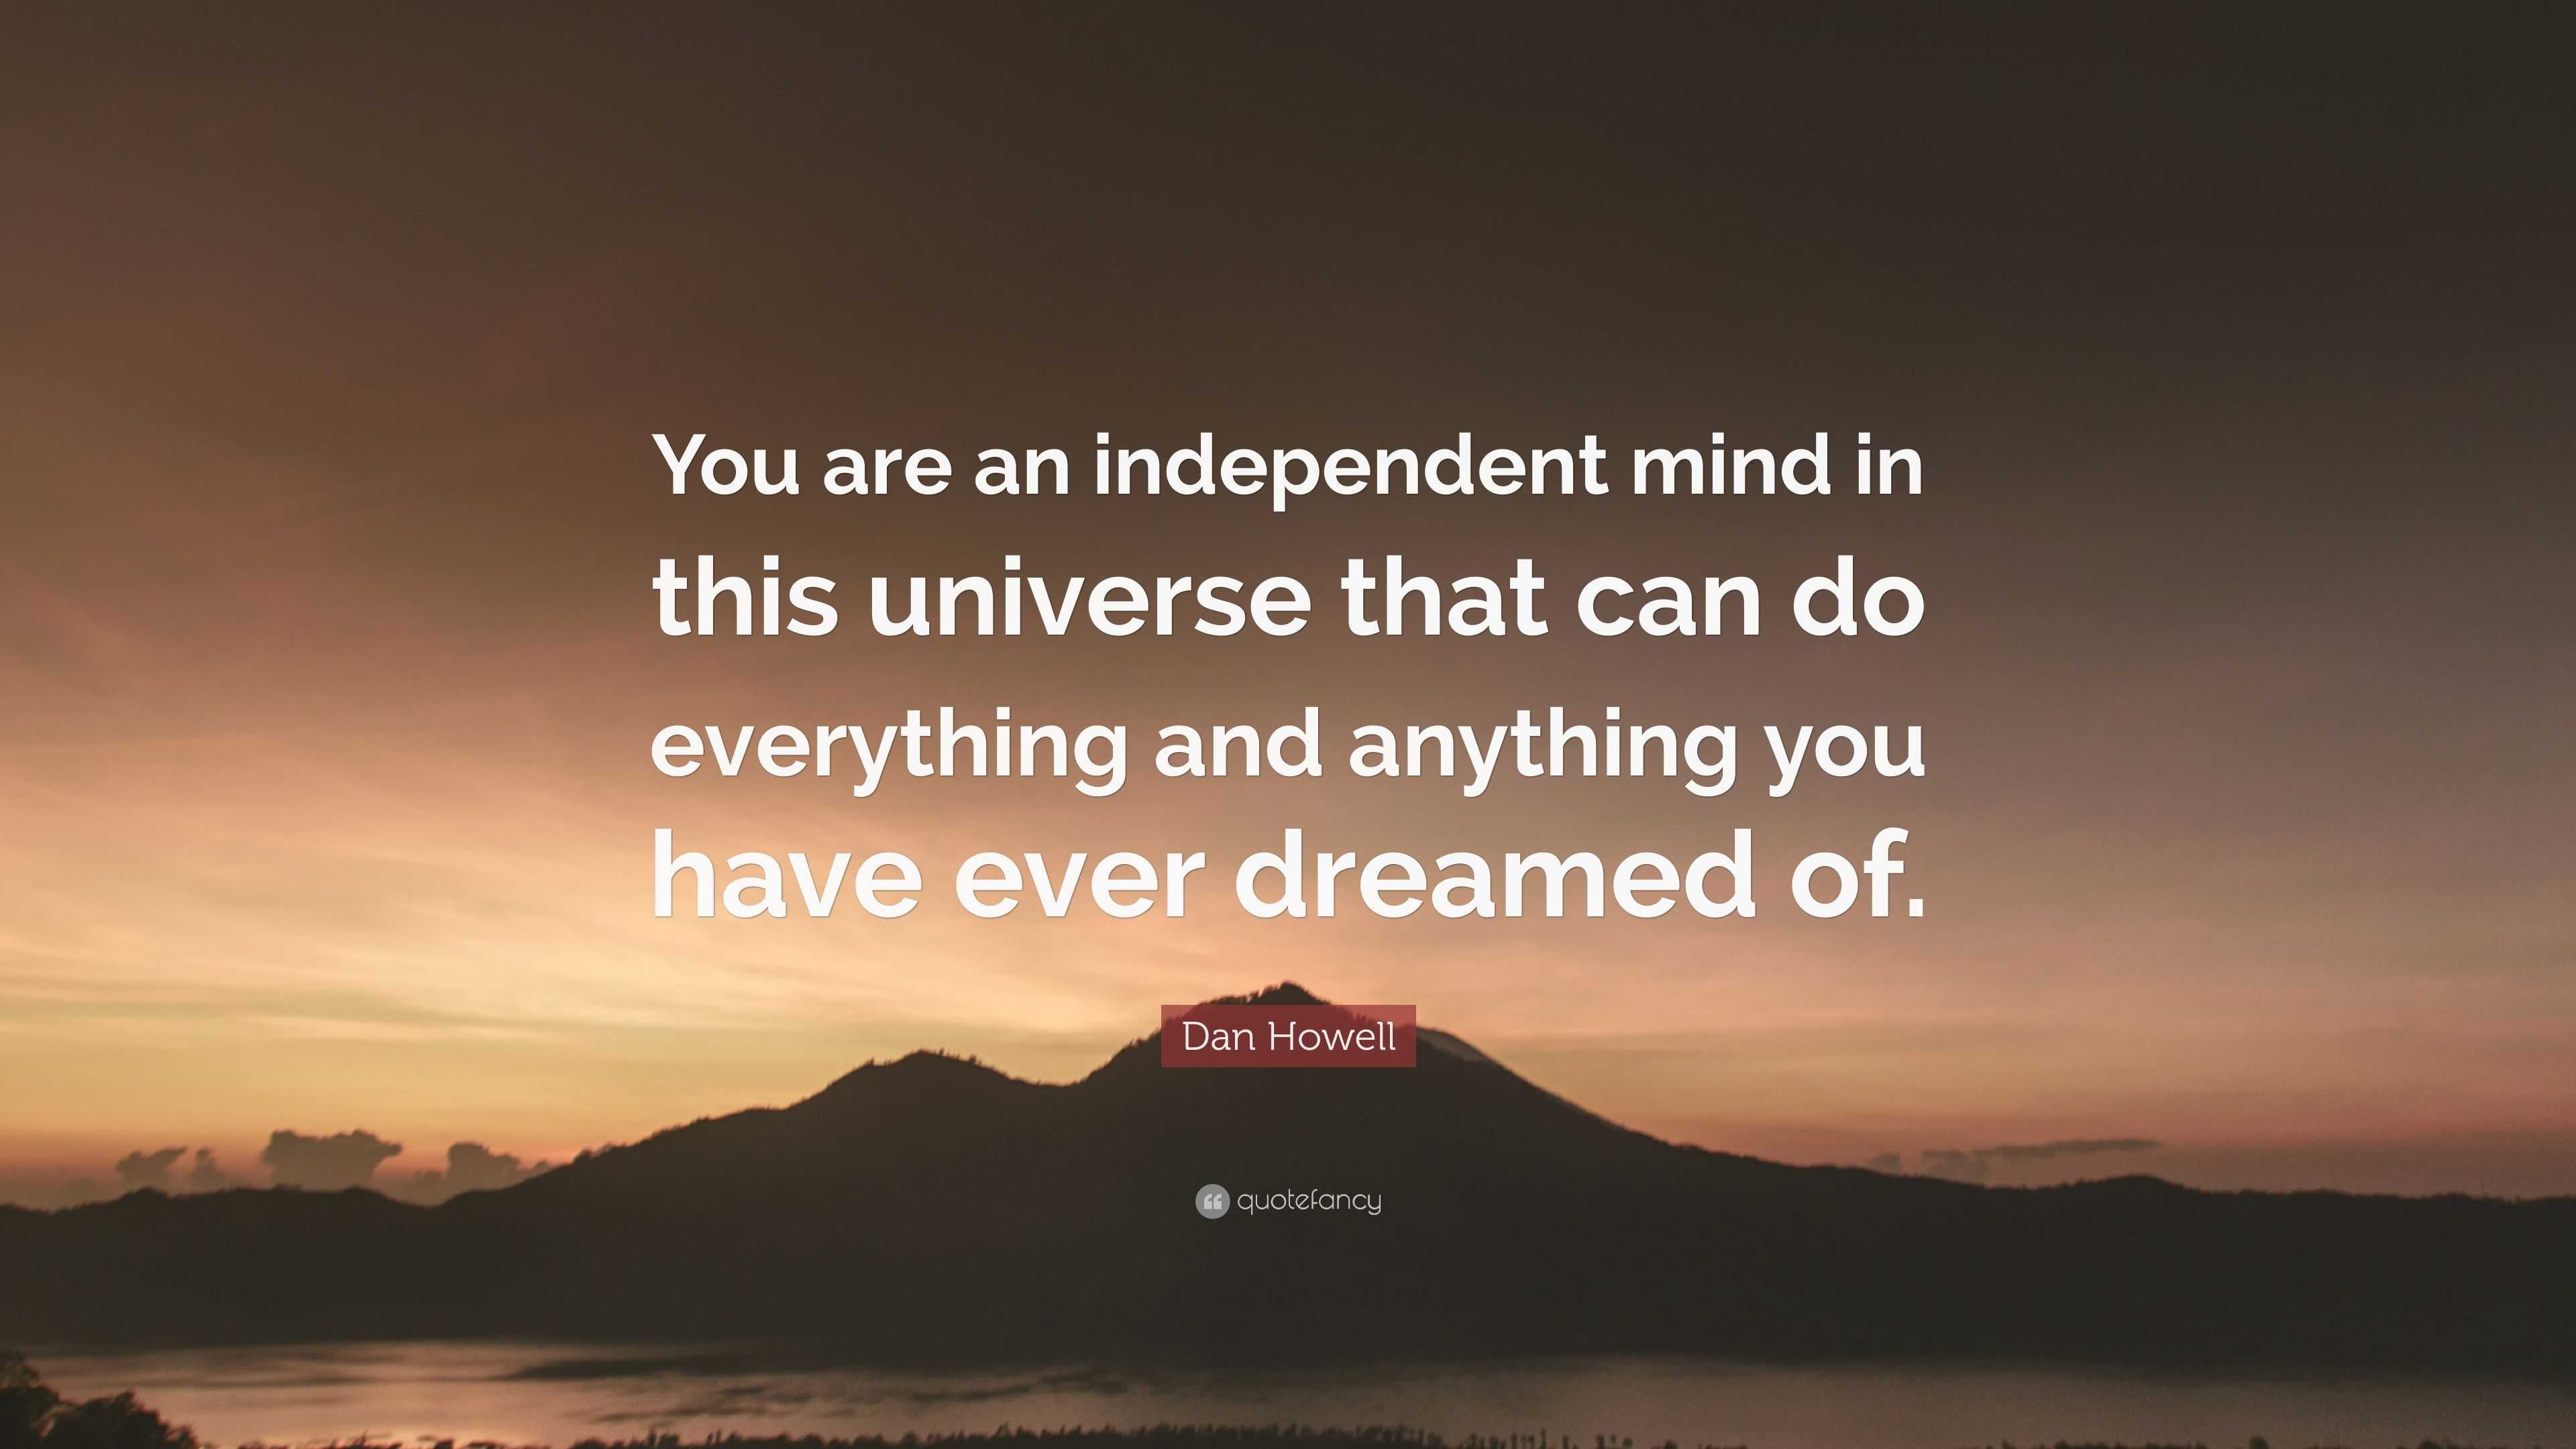 Dan Howell Quote: “You are an independent mind in this universe that